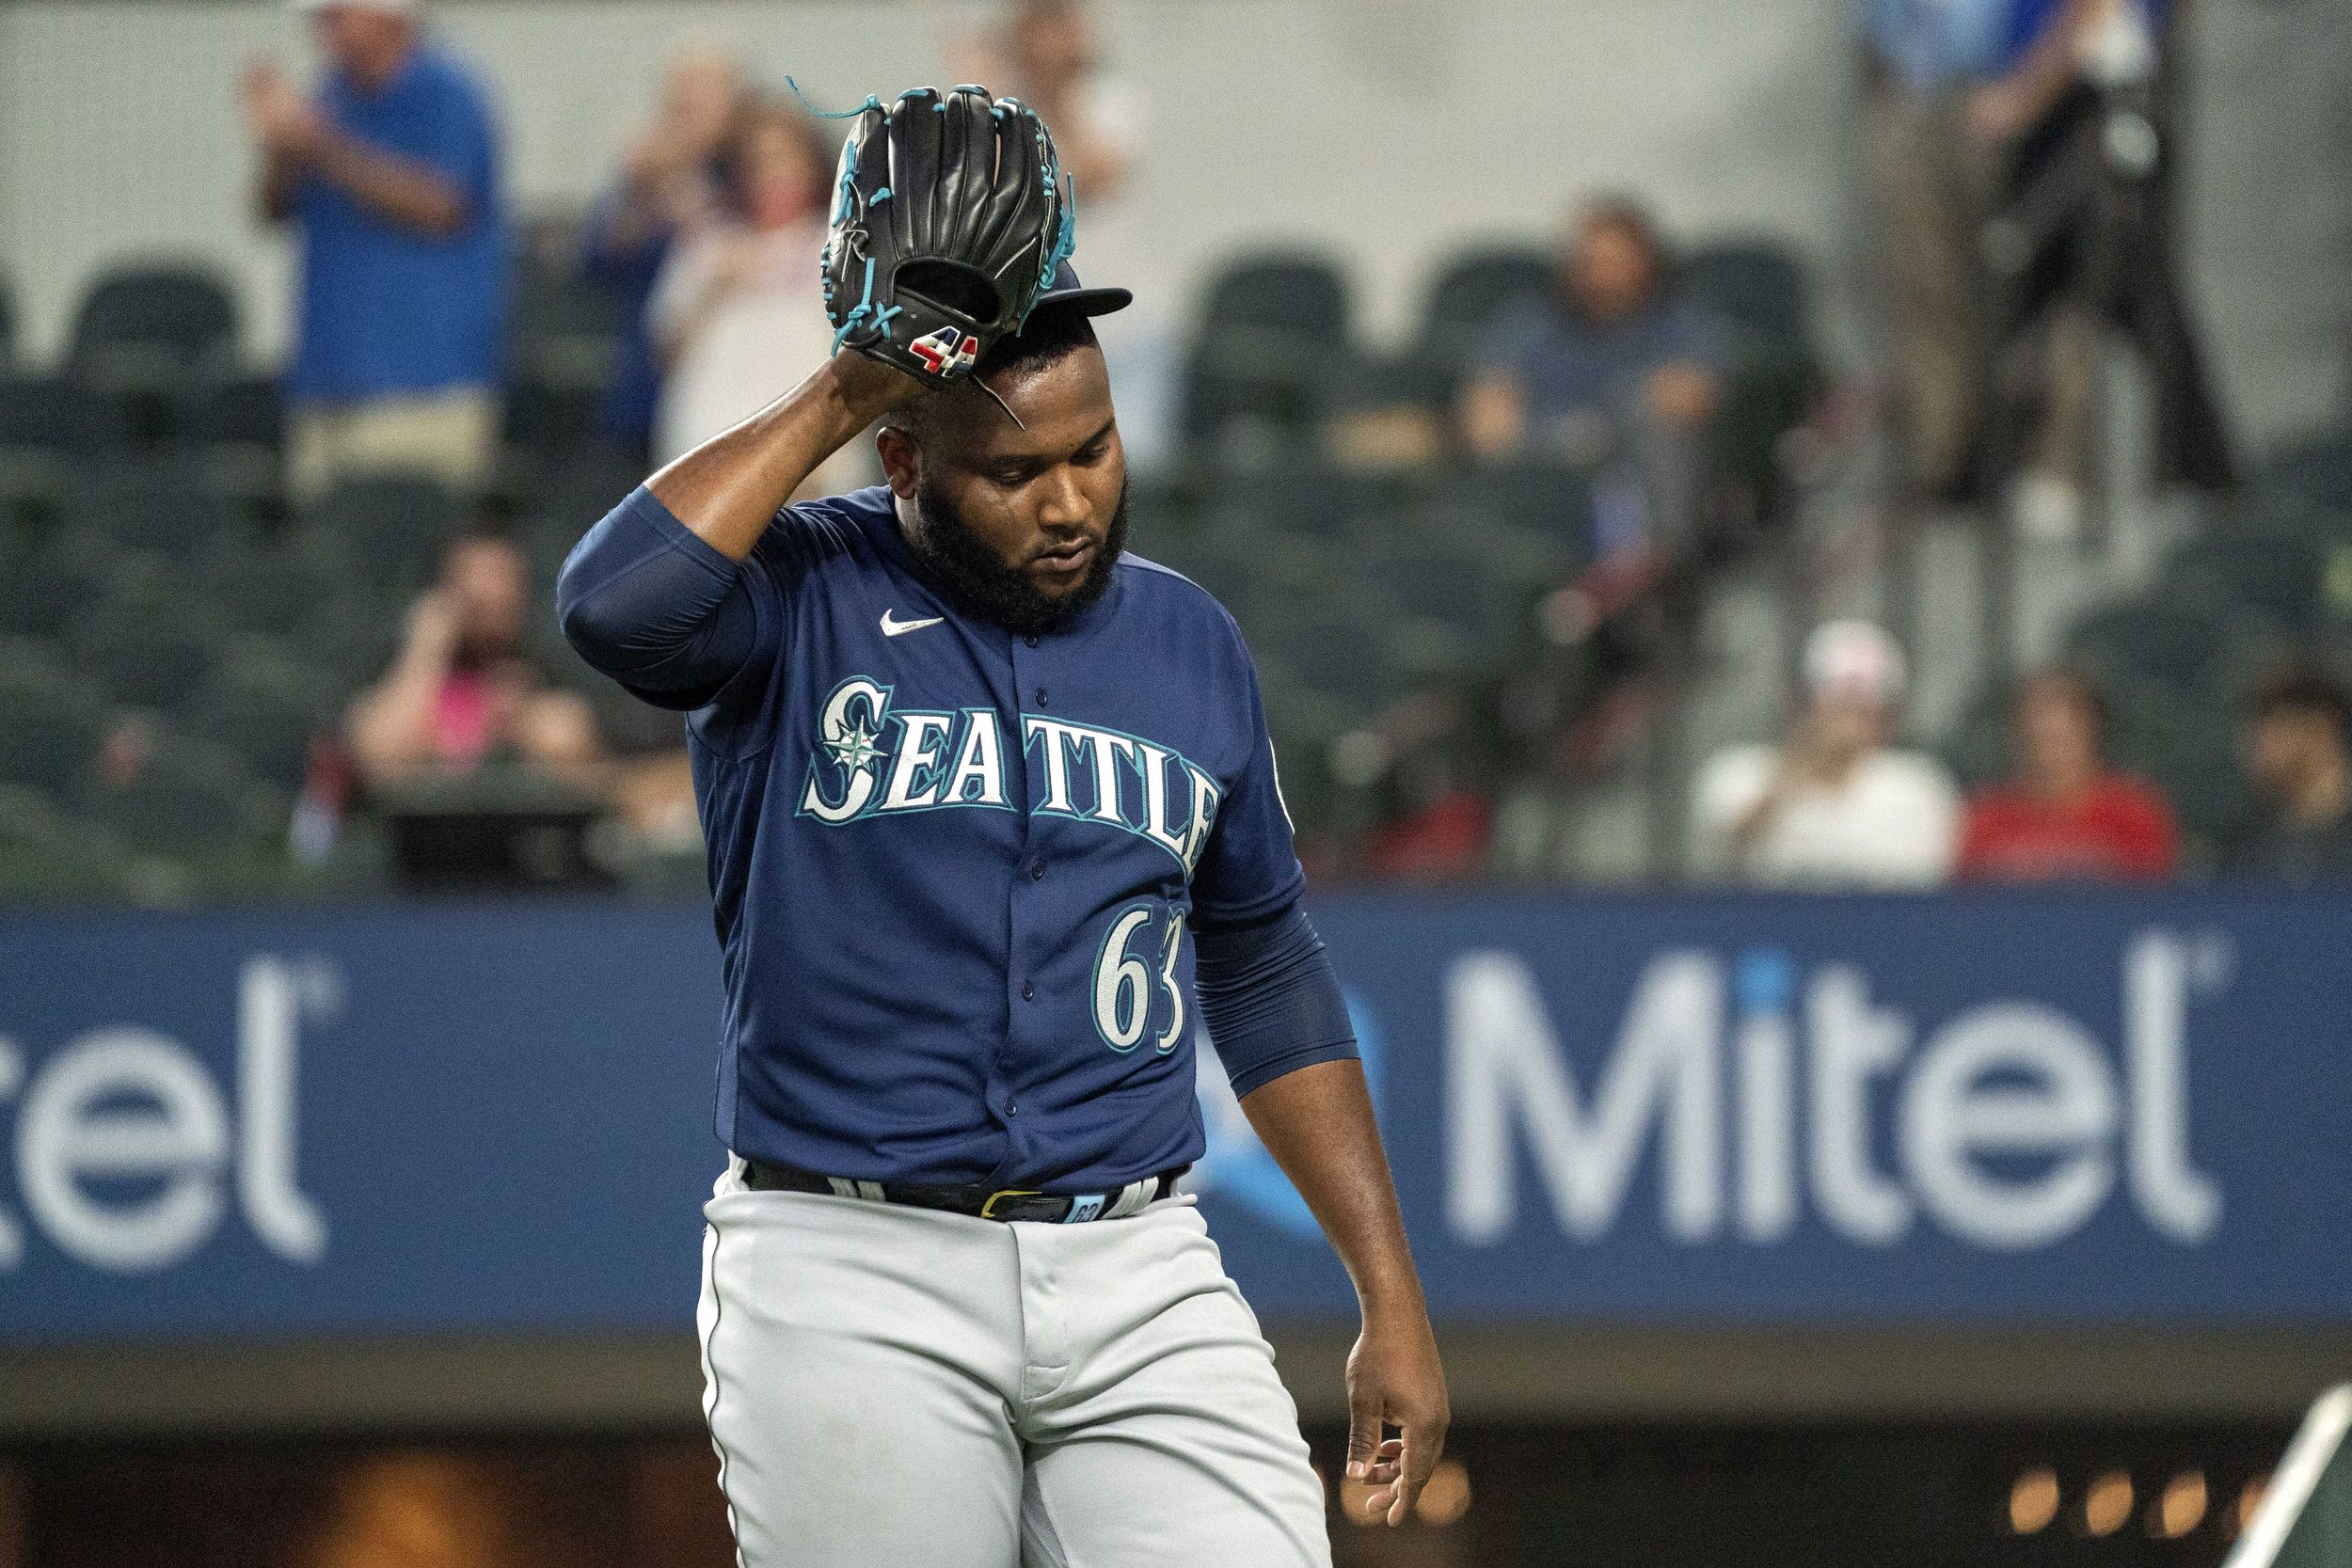 Mariners rally past Rangers 6-5 for 11th consecutive victory - The Columbian